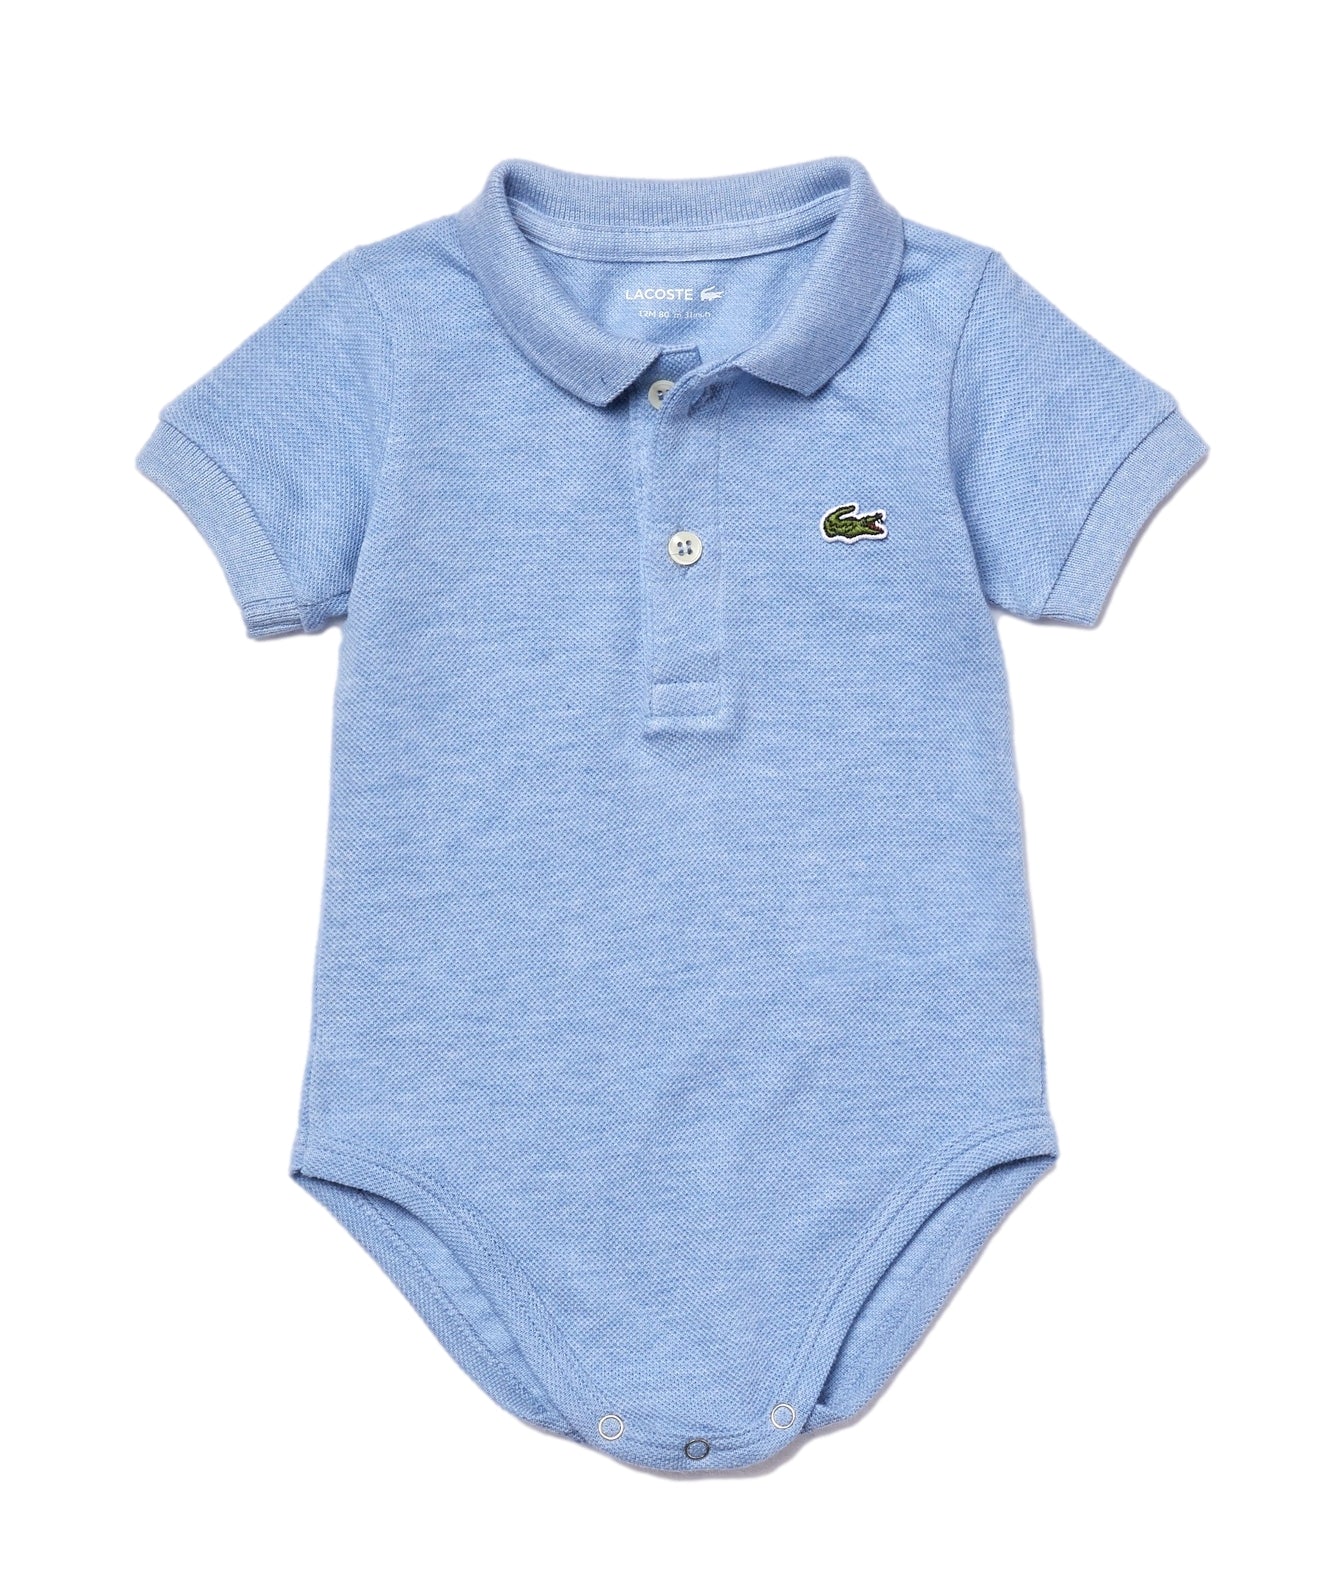 Lacoste Baby Polo Shirt Onesie